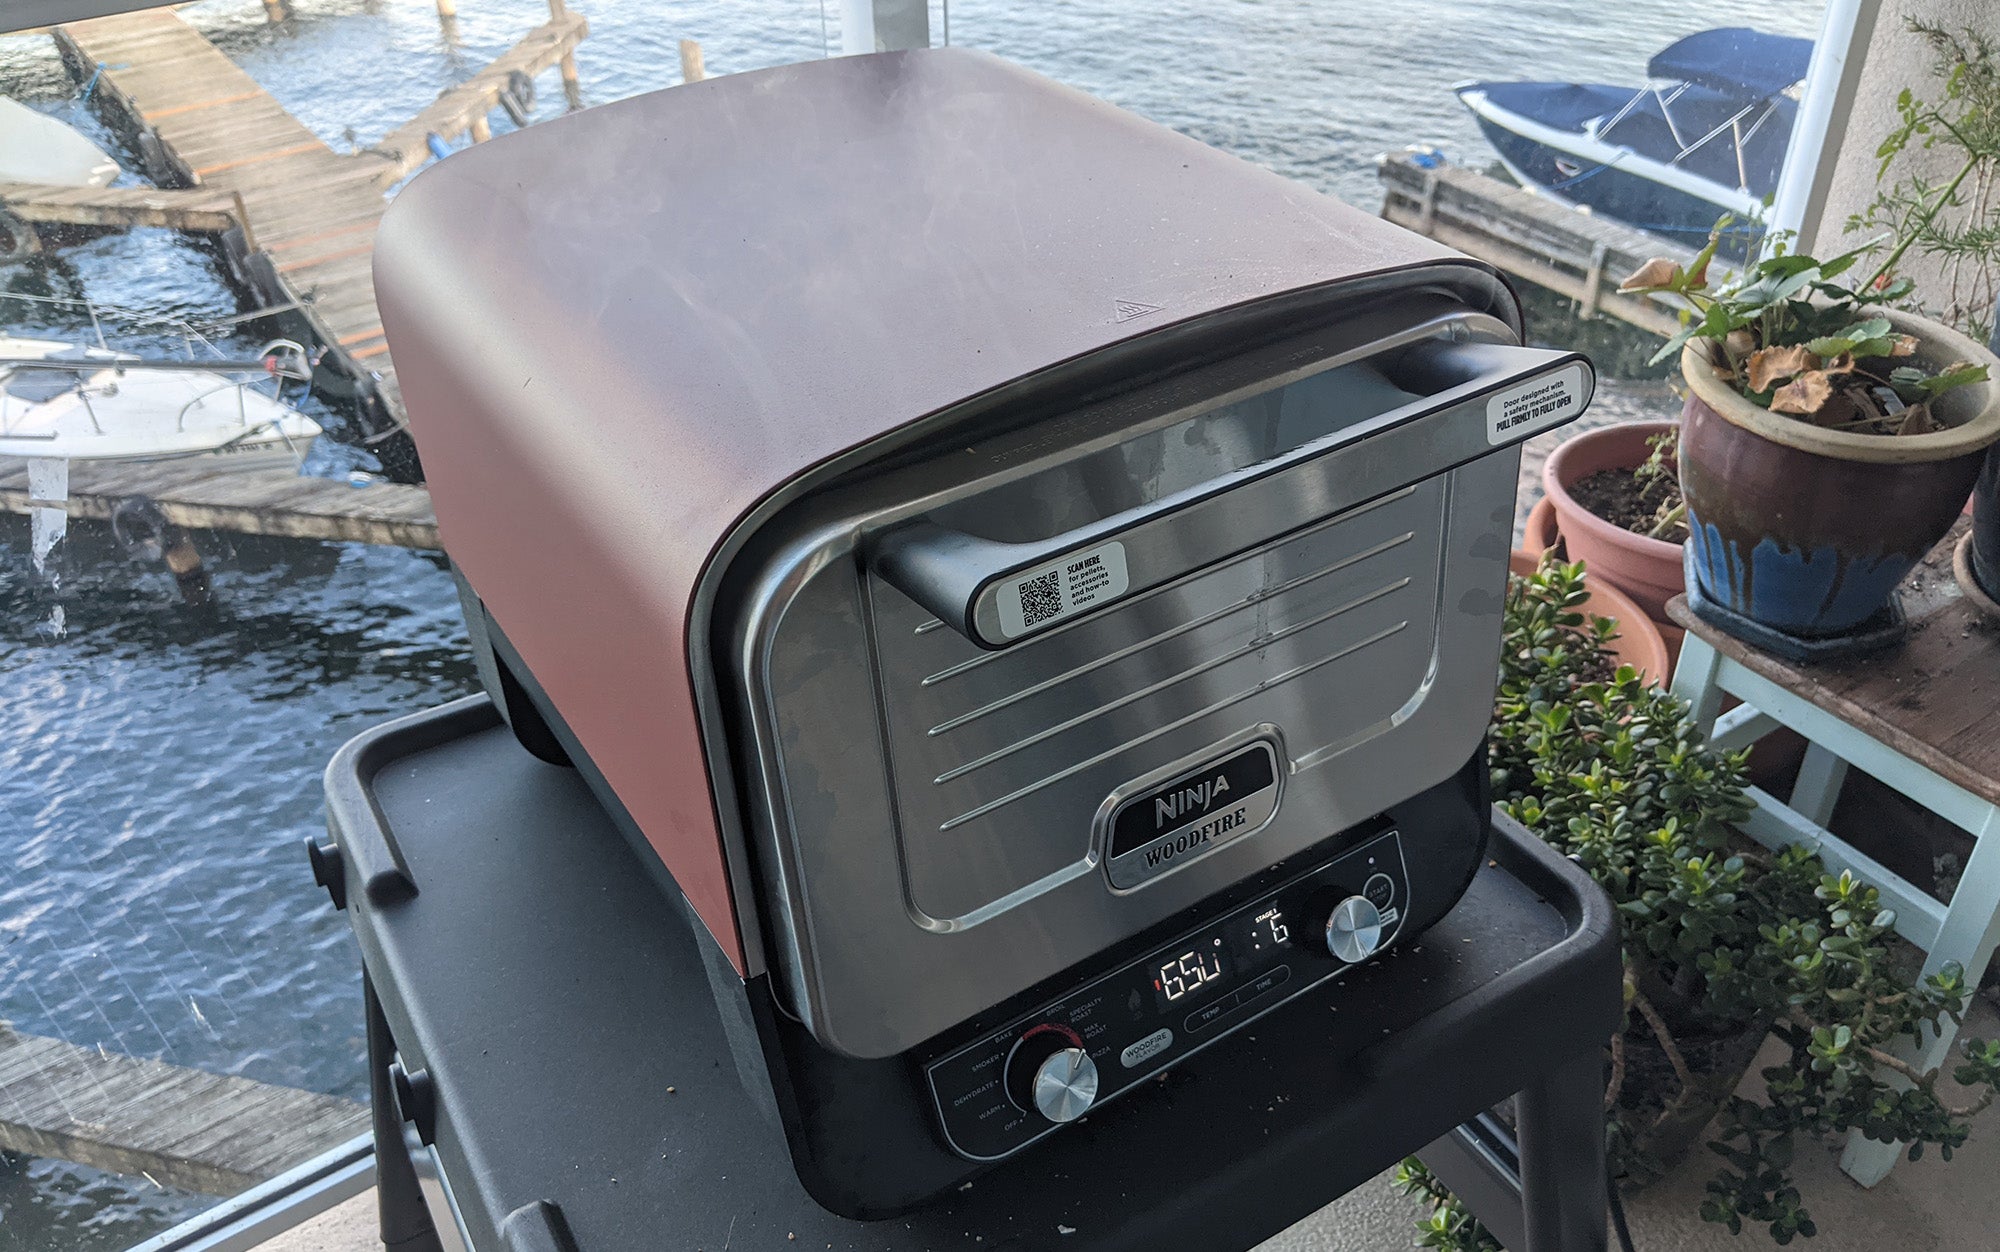 We tested the Ninja Woodfire 8-in-1 Outdoor Oven.